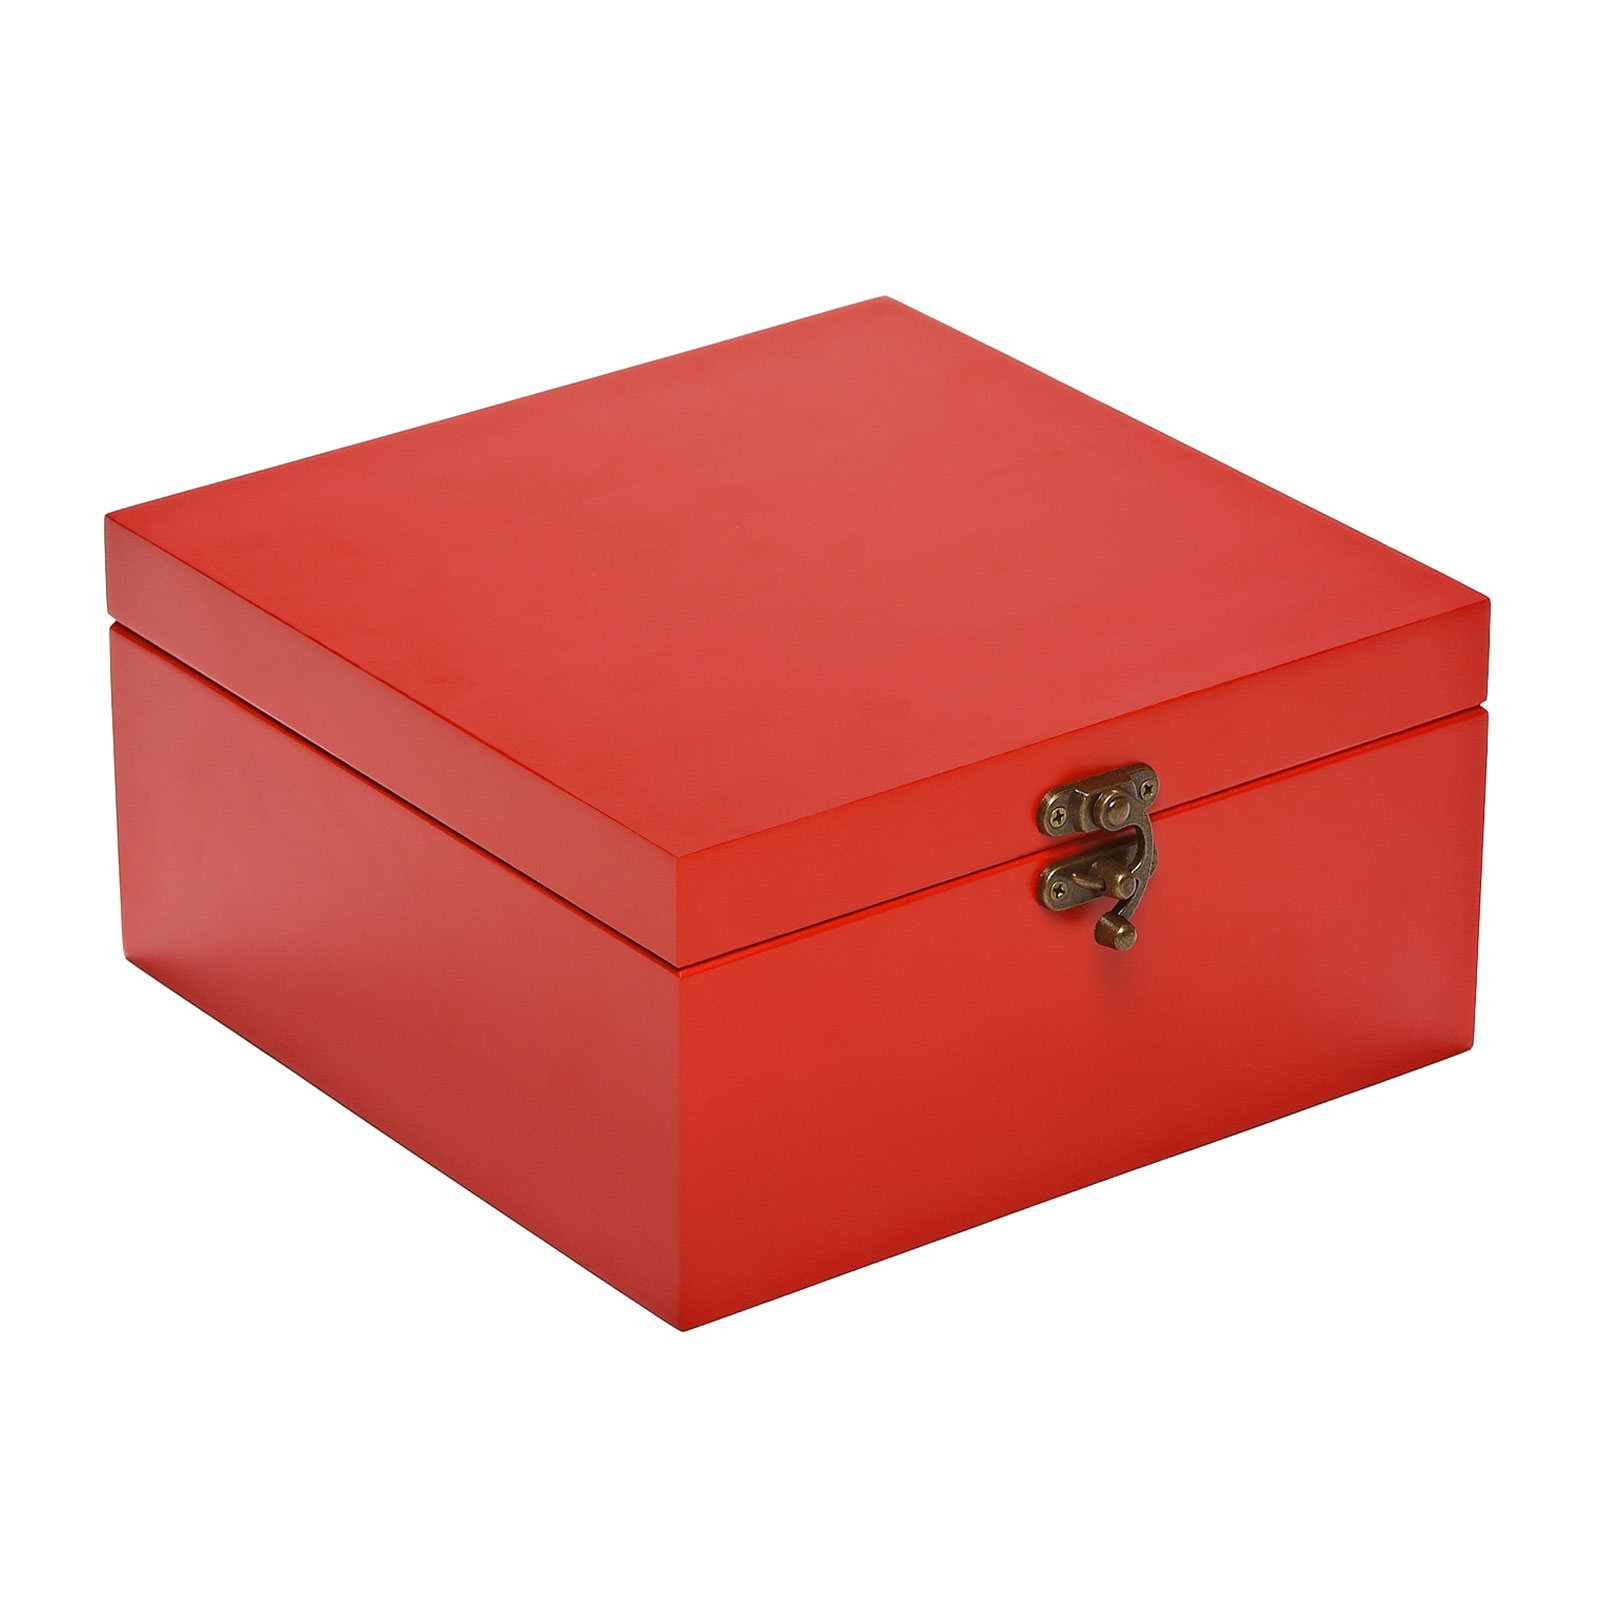 Red & White Painted Boxes 